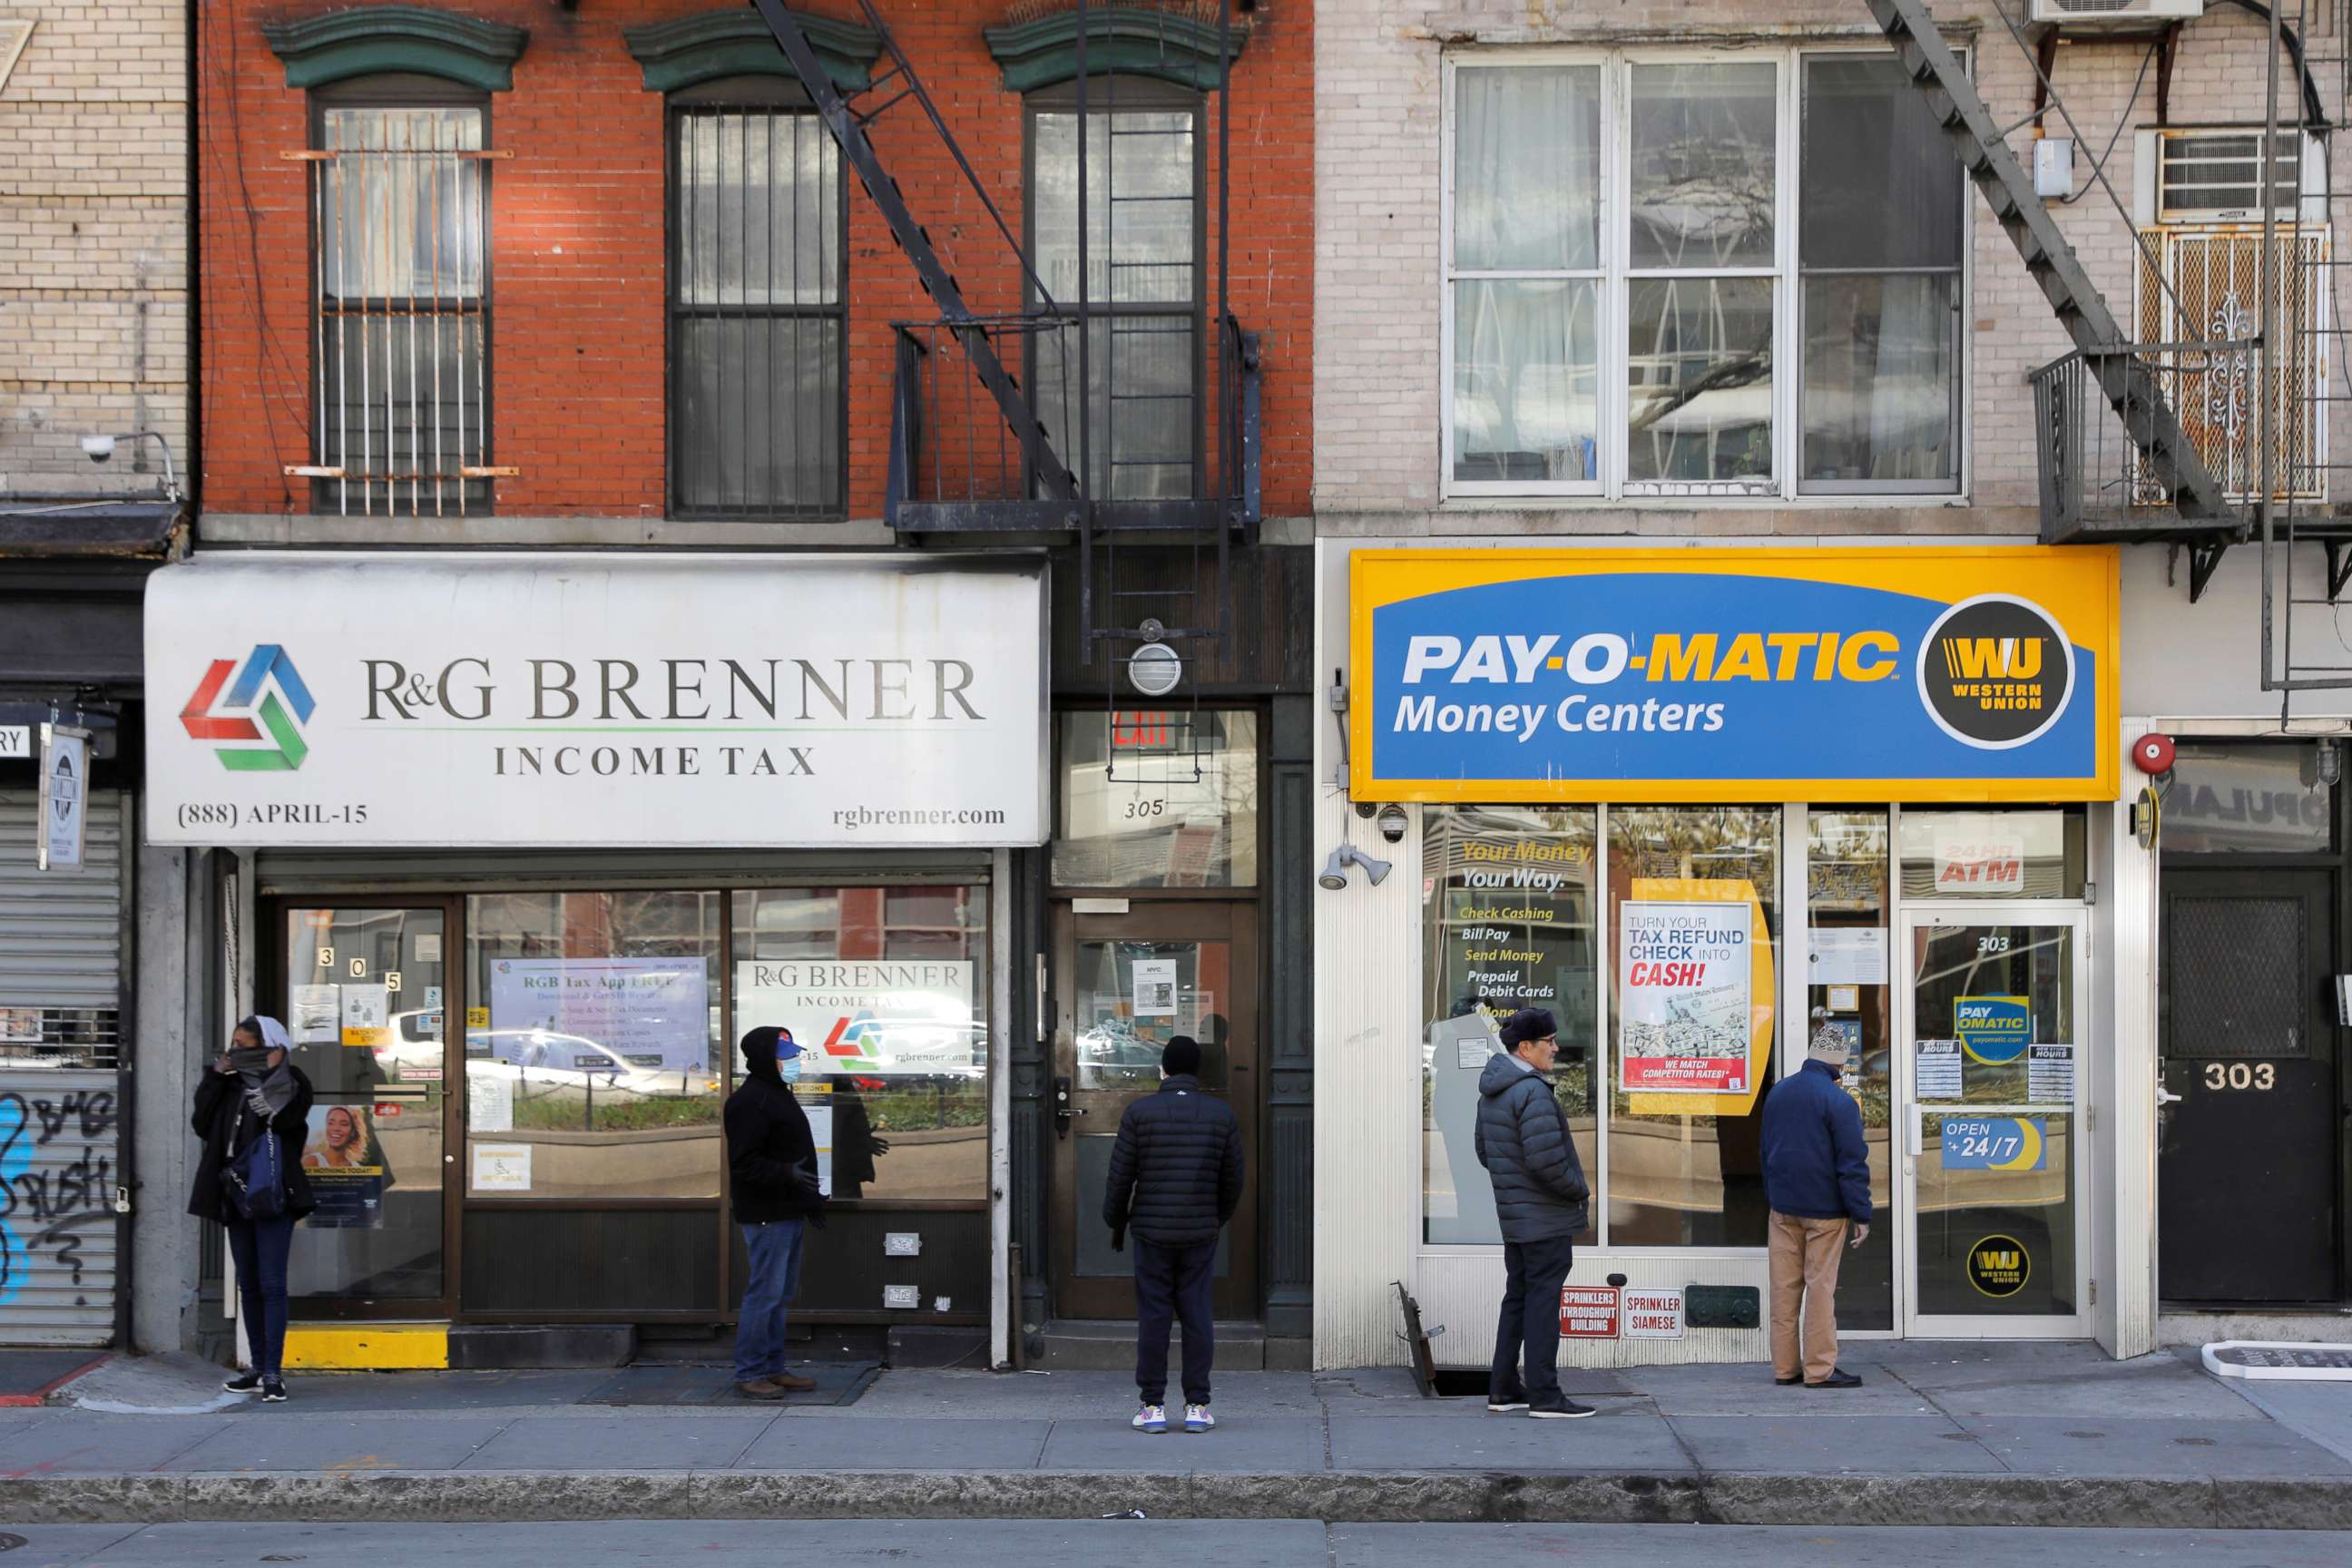 PHOTO:People queue to enter Payomatic, a business that offers check cashing, as unemployment claim figures were released, during the coronavirus disease (COVID-19) outbreak in Manhattan, New York City, April 2, 2020.